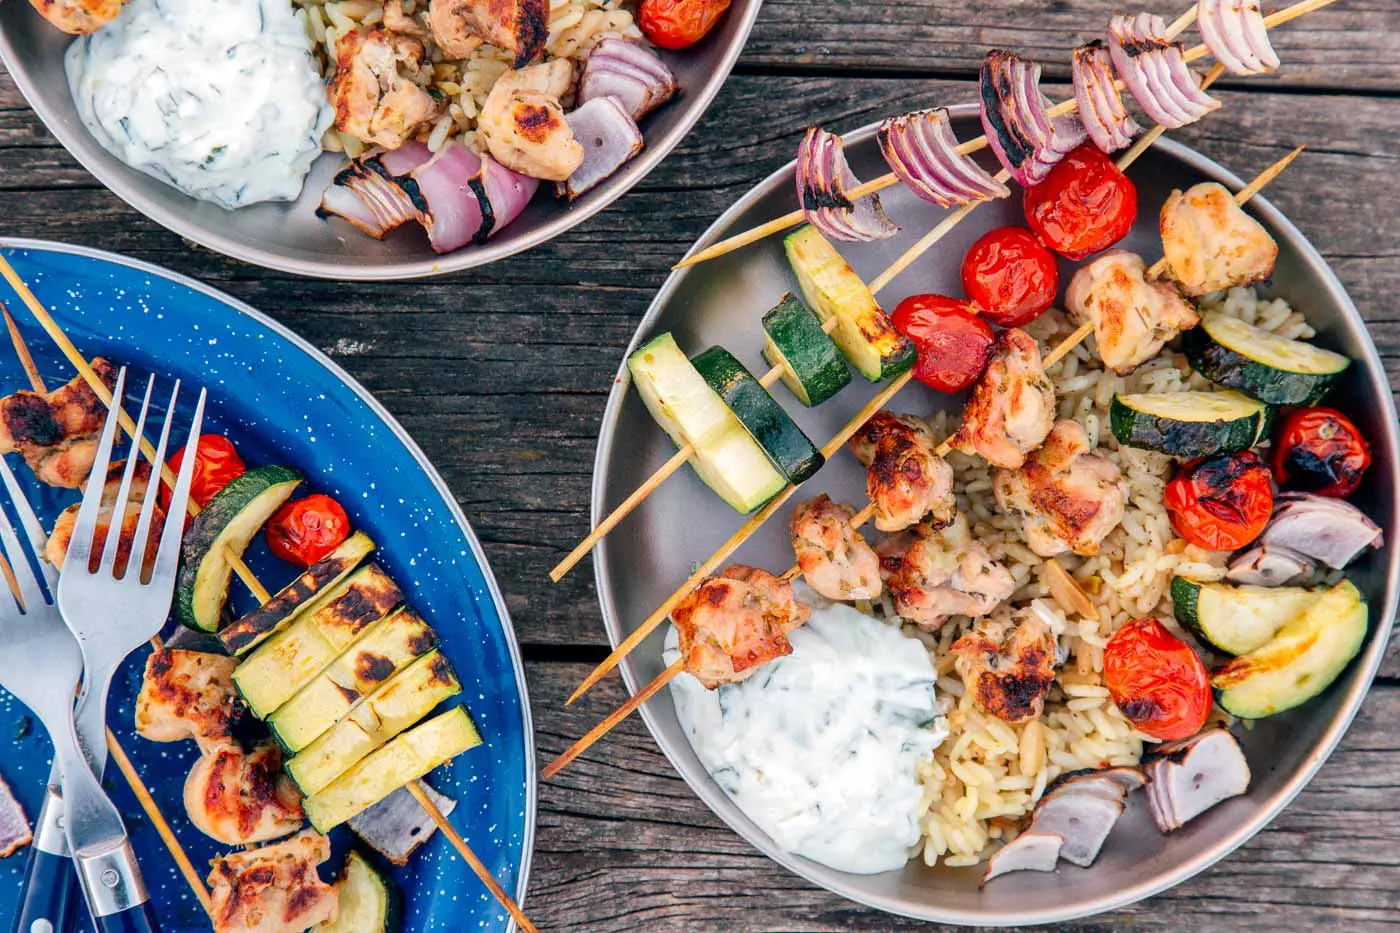 Grilled chicken kabobs on blue and silver camping plates.